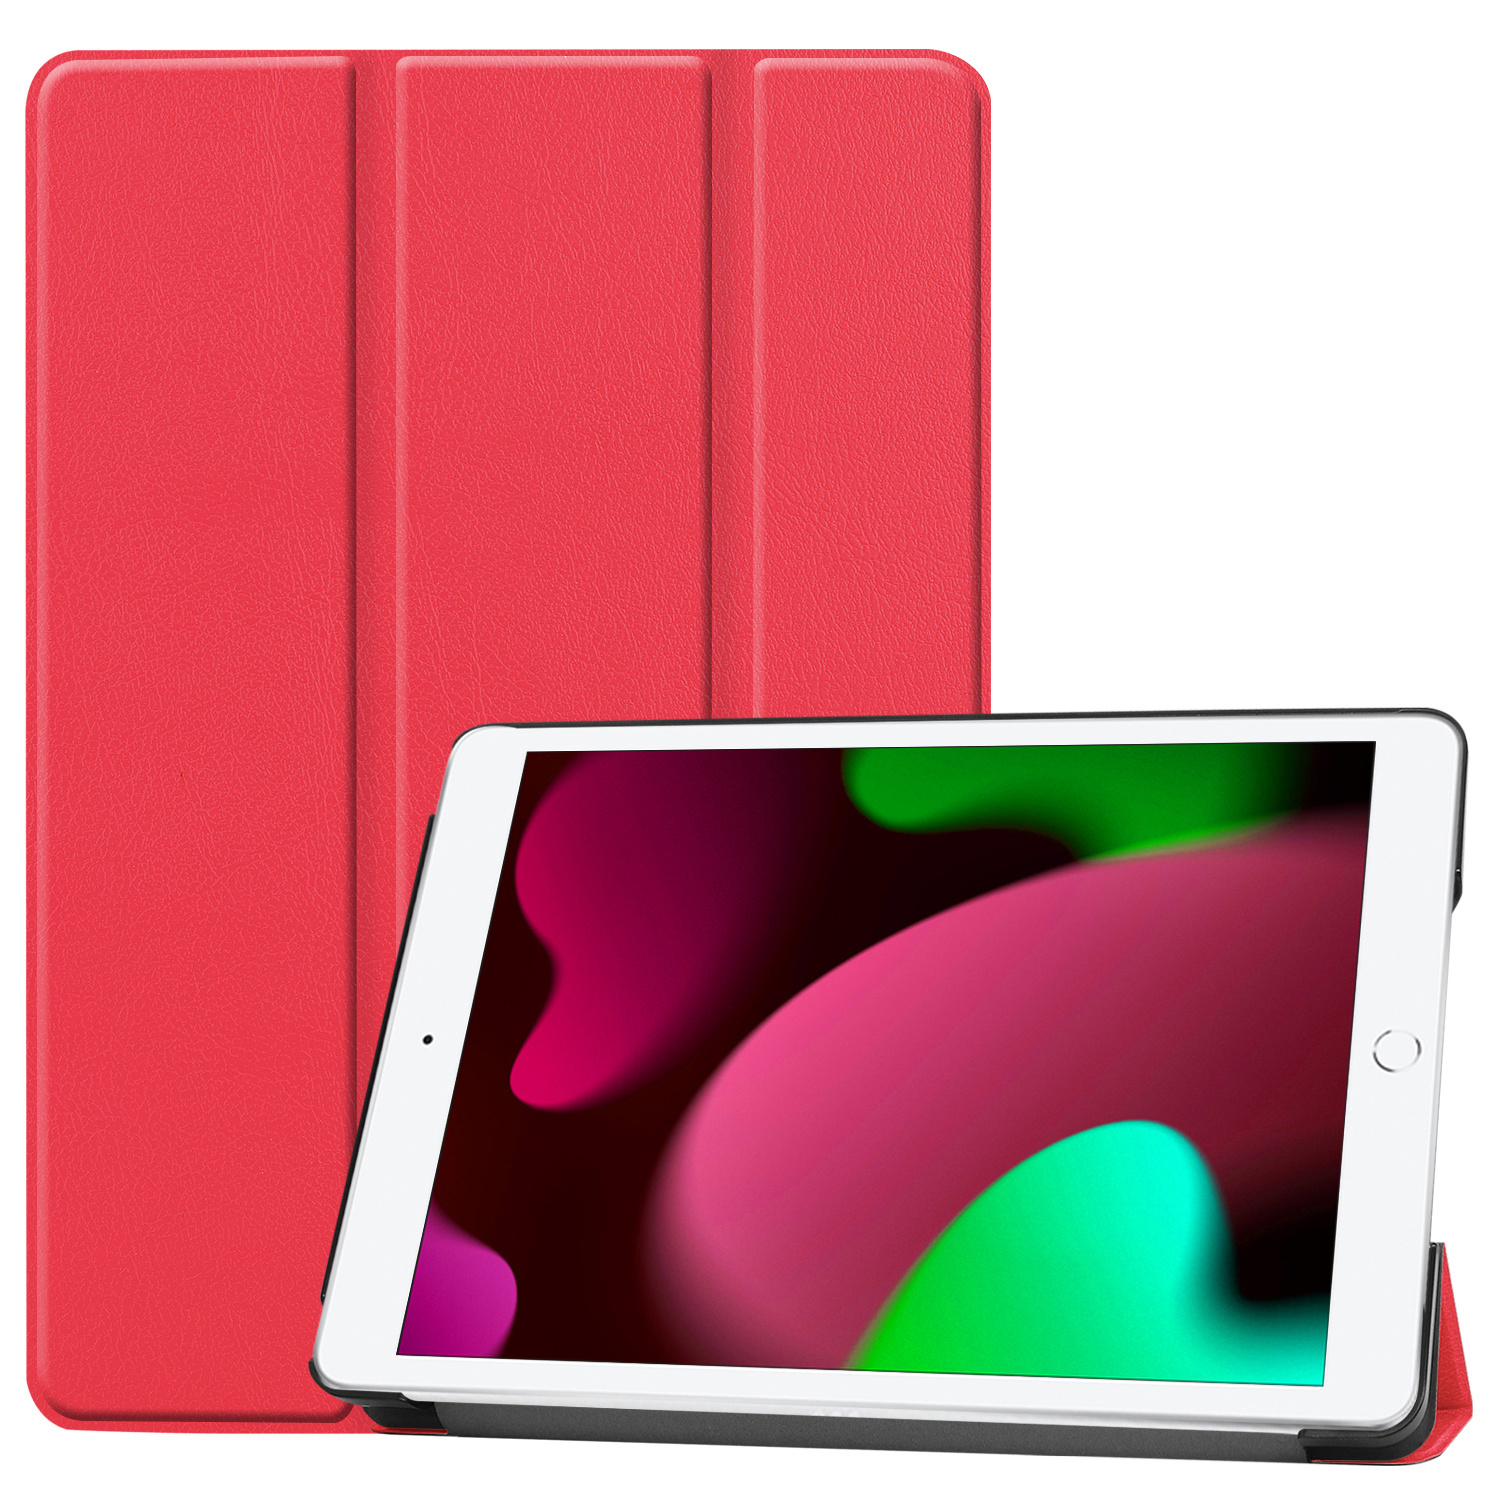 Nomfy iPad 10.2 2019 Hoesje Book Case Hoes - iPad 10.2 2019 Hoes Hardcover Case Hoesje - Rood